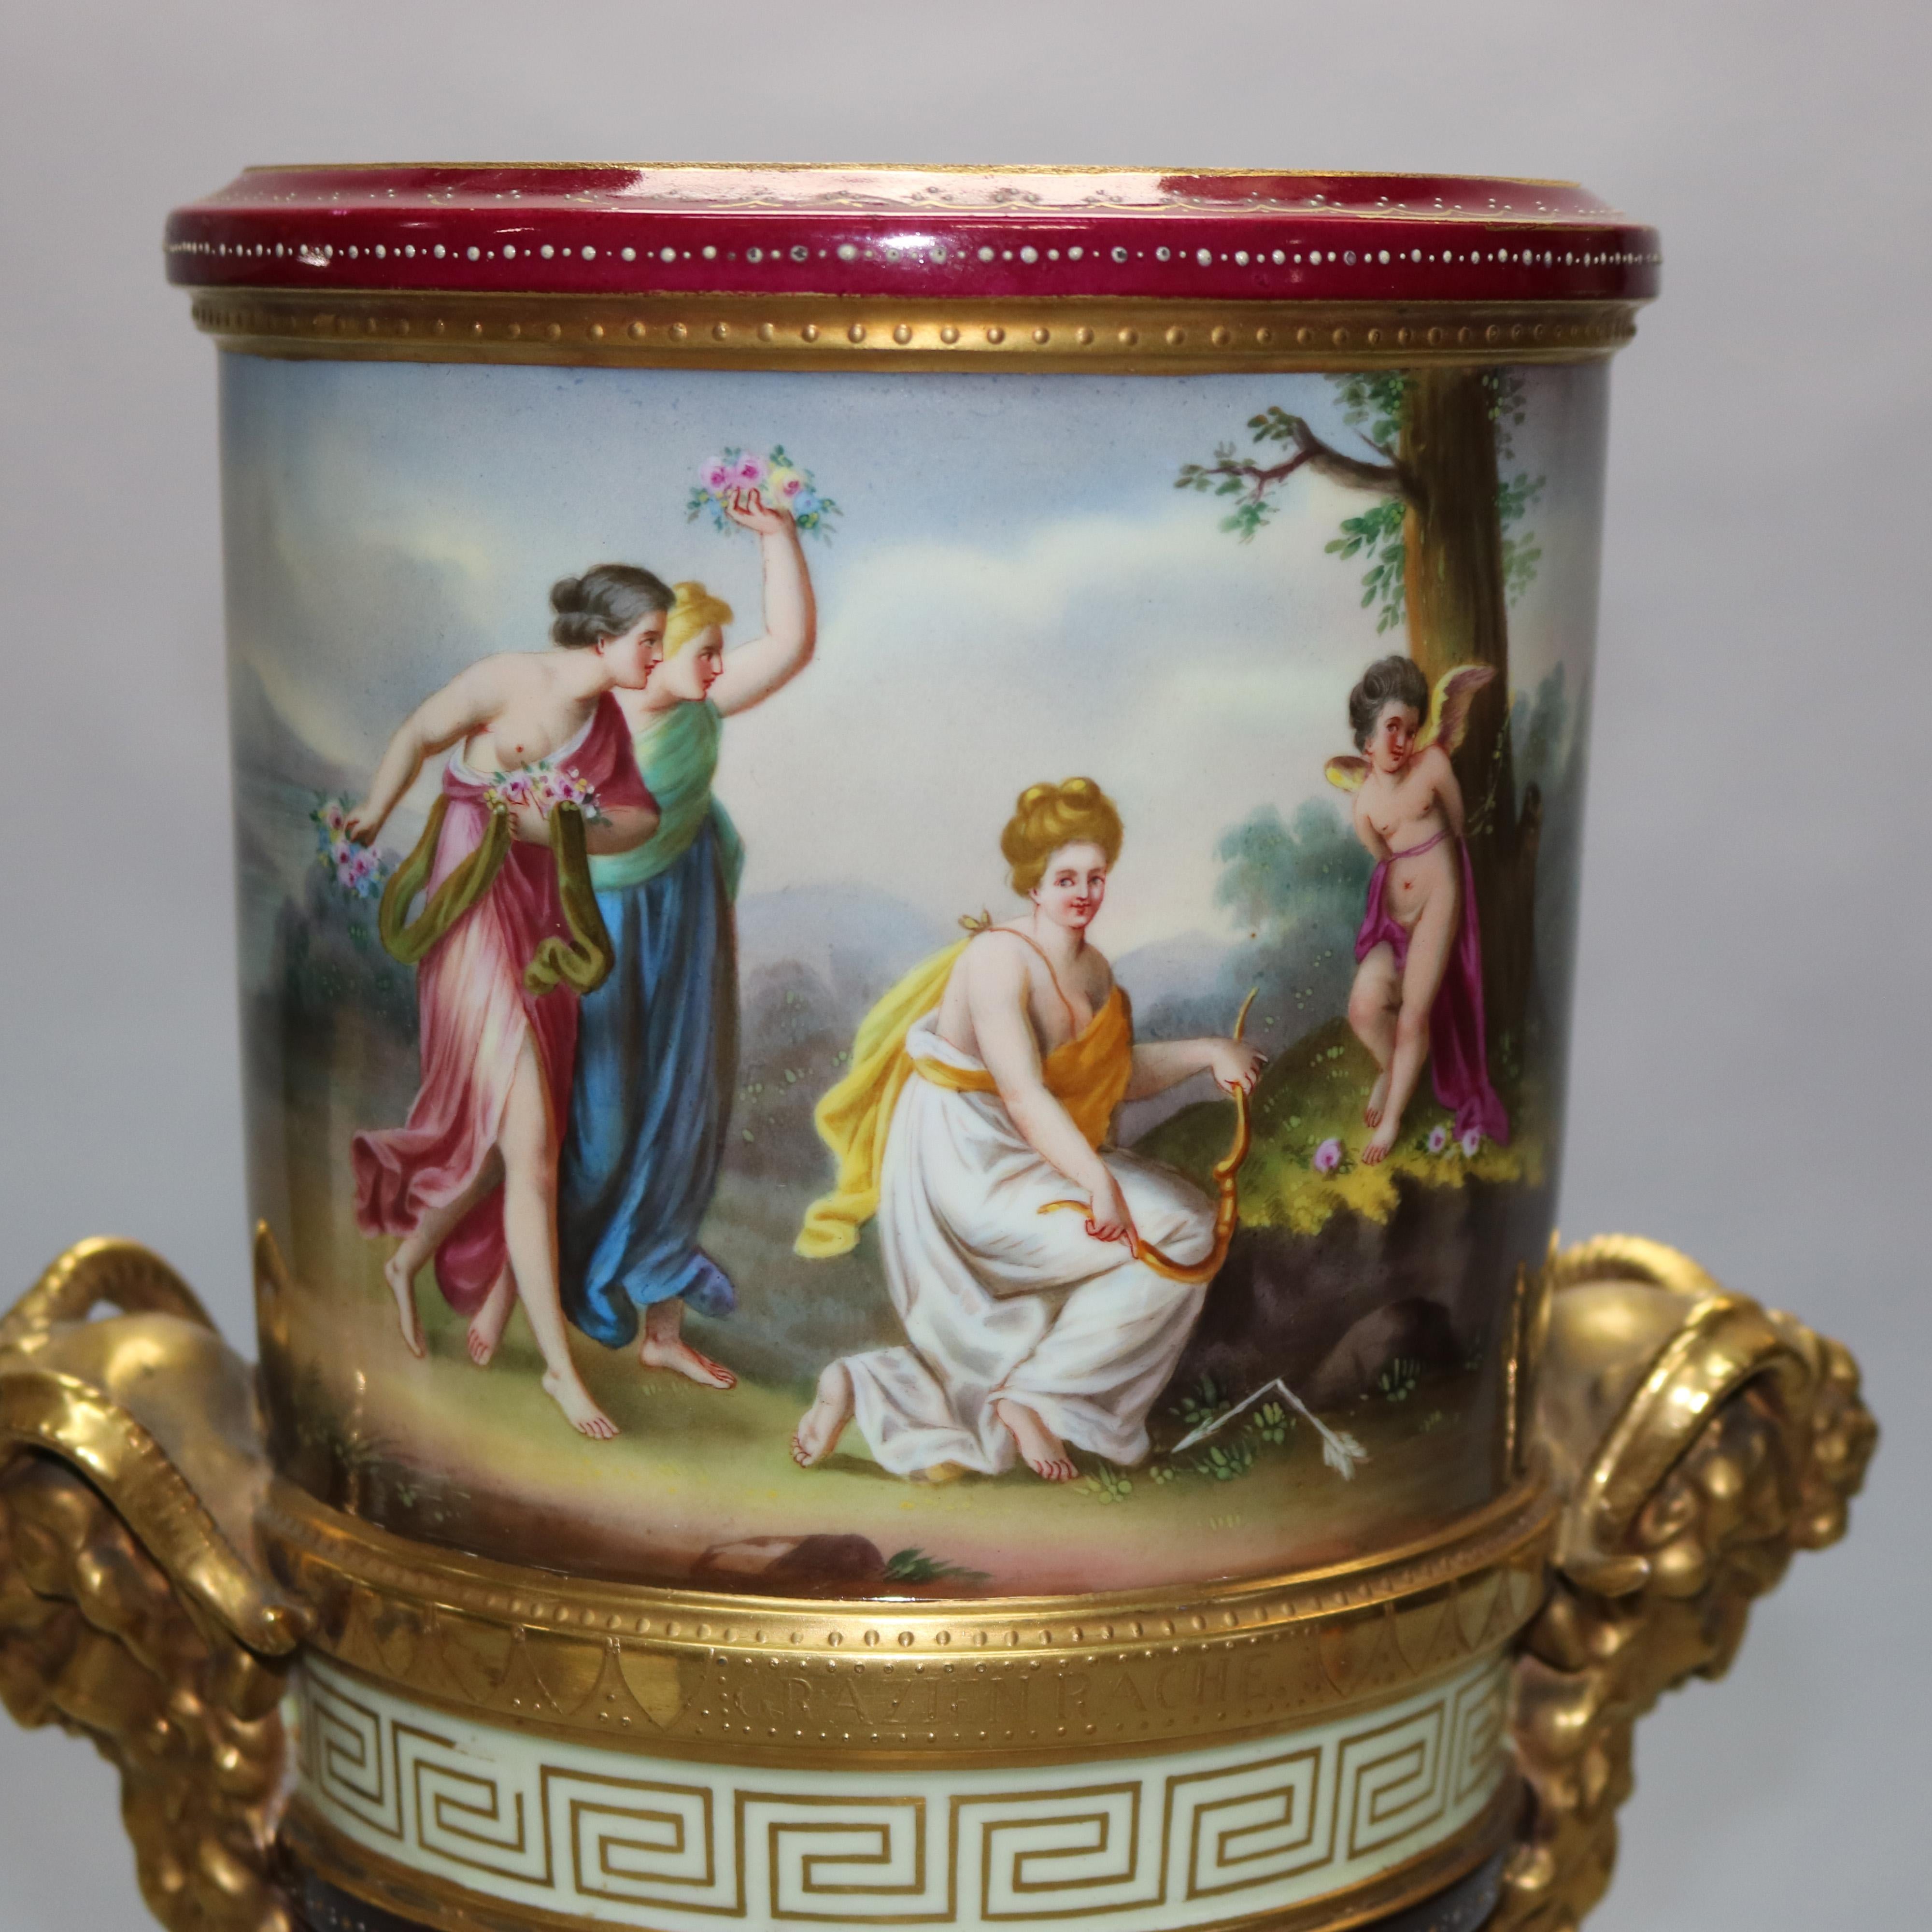 Austrian Antique Large Artist Signed Royal Vienna Neoclassical Scenic Porcelain Urn c1880